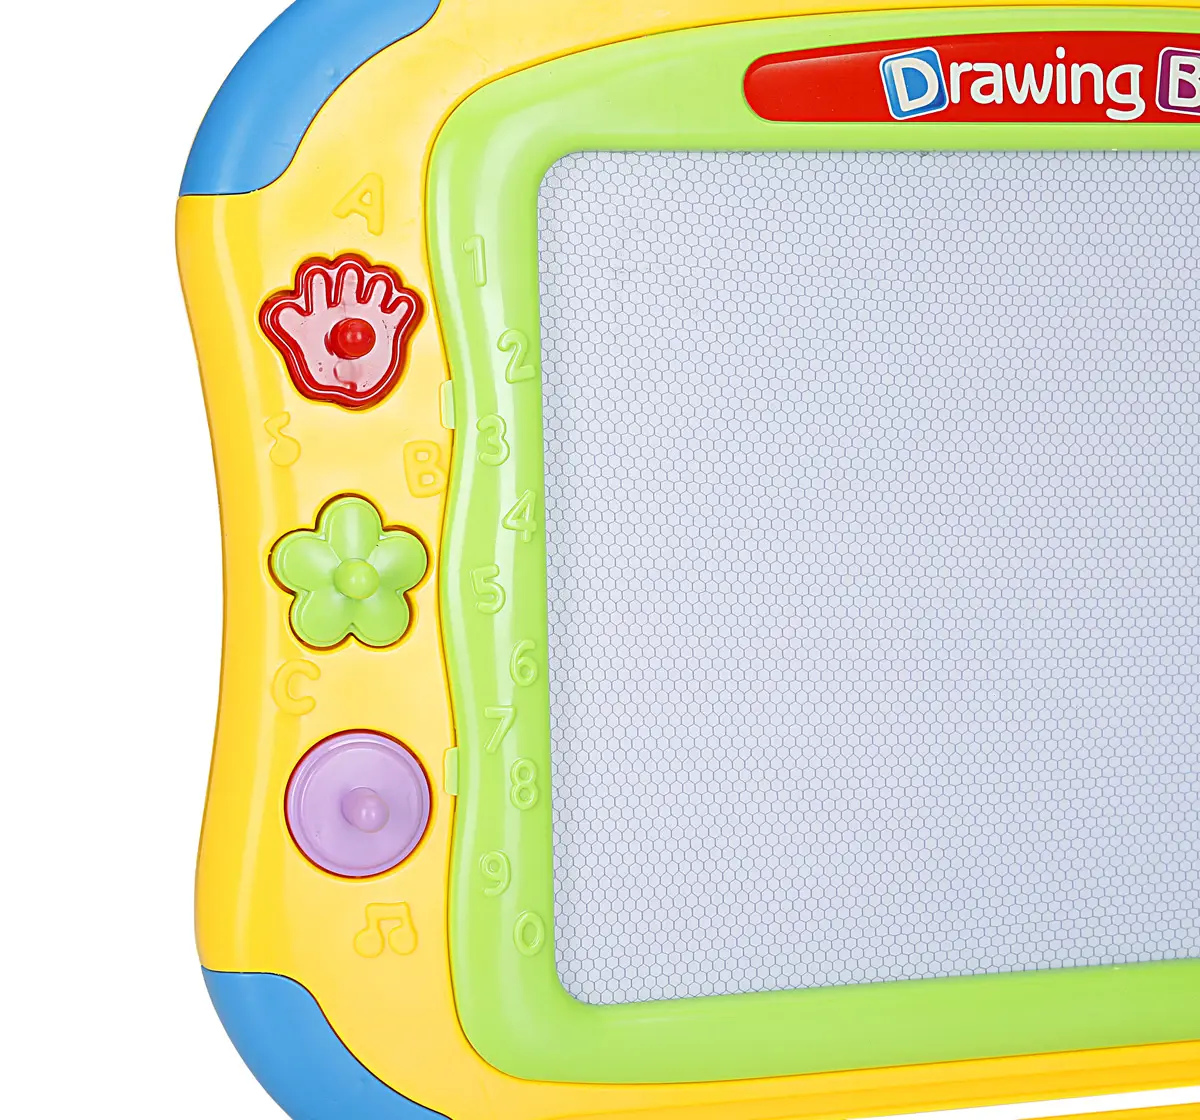 Karma Drawing Doddle Board Large for kids 3Y+, Multicolour